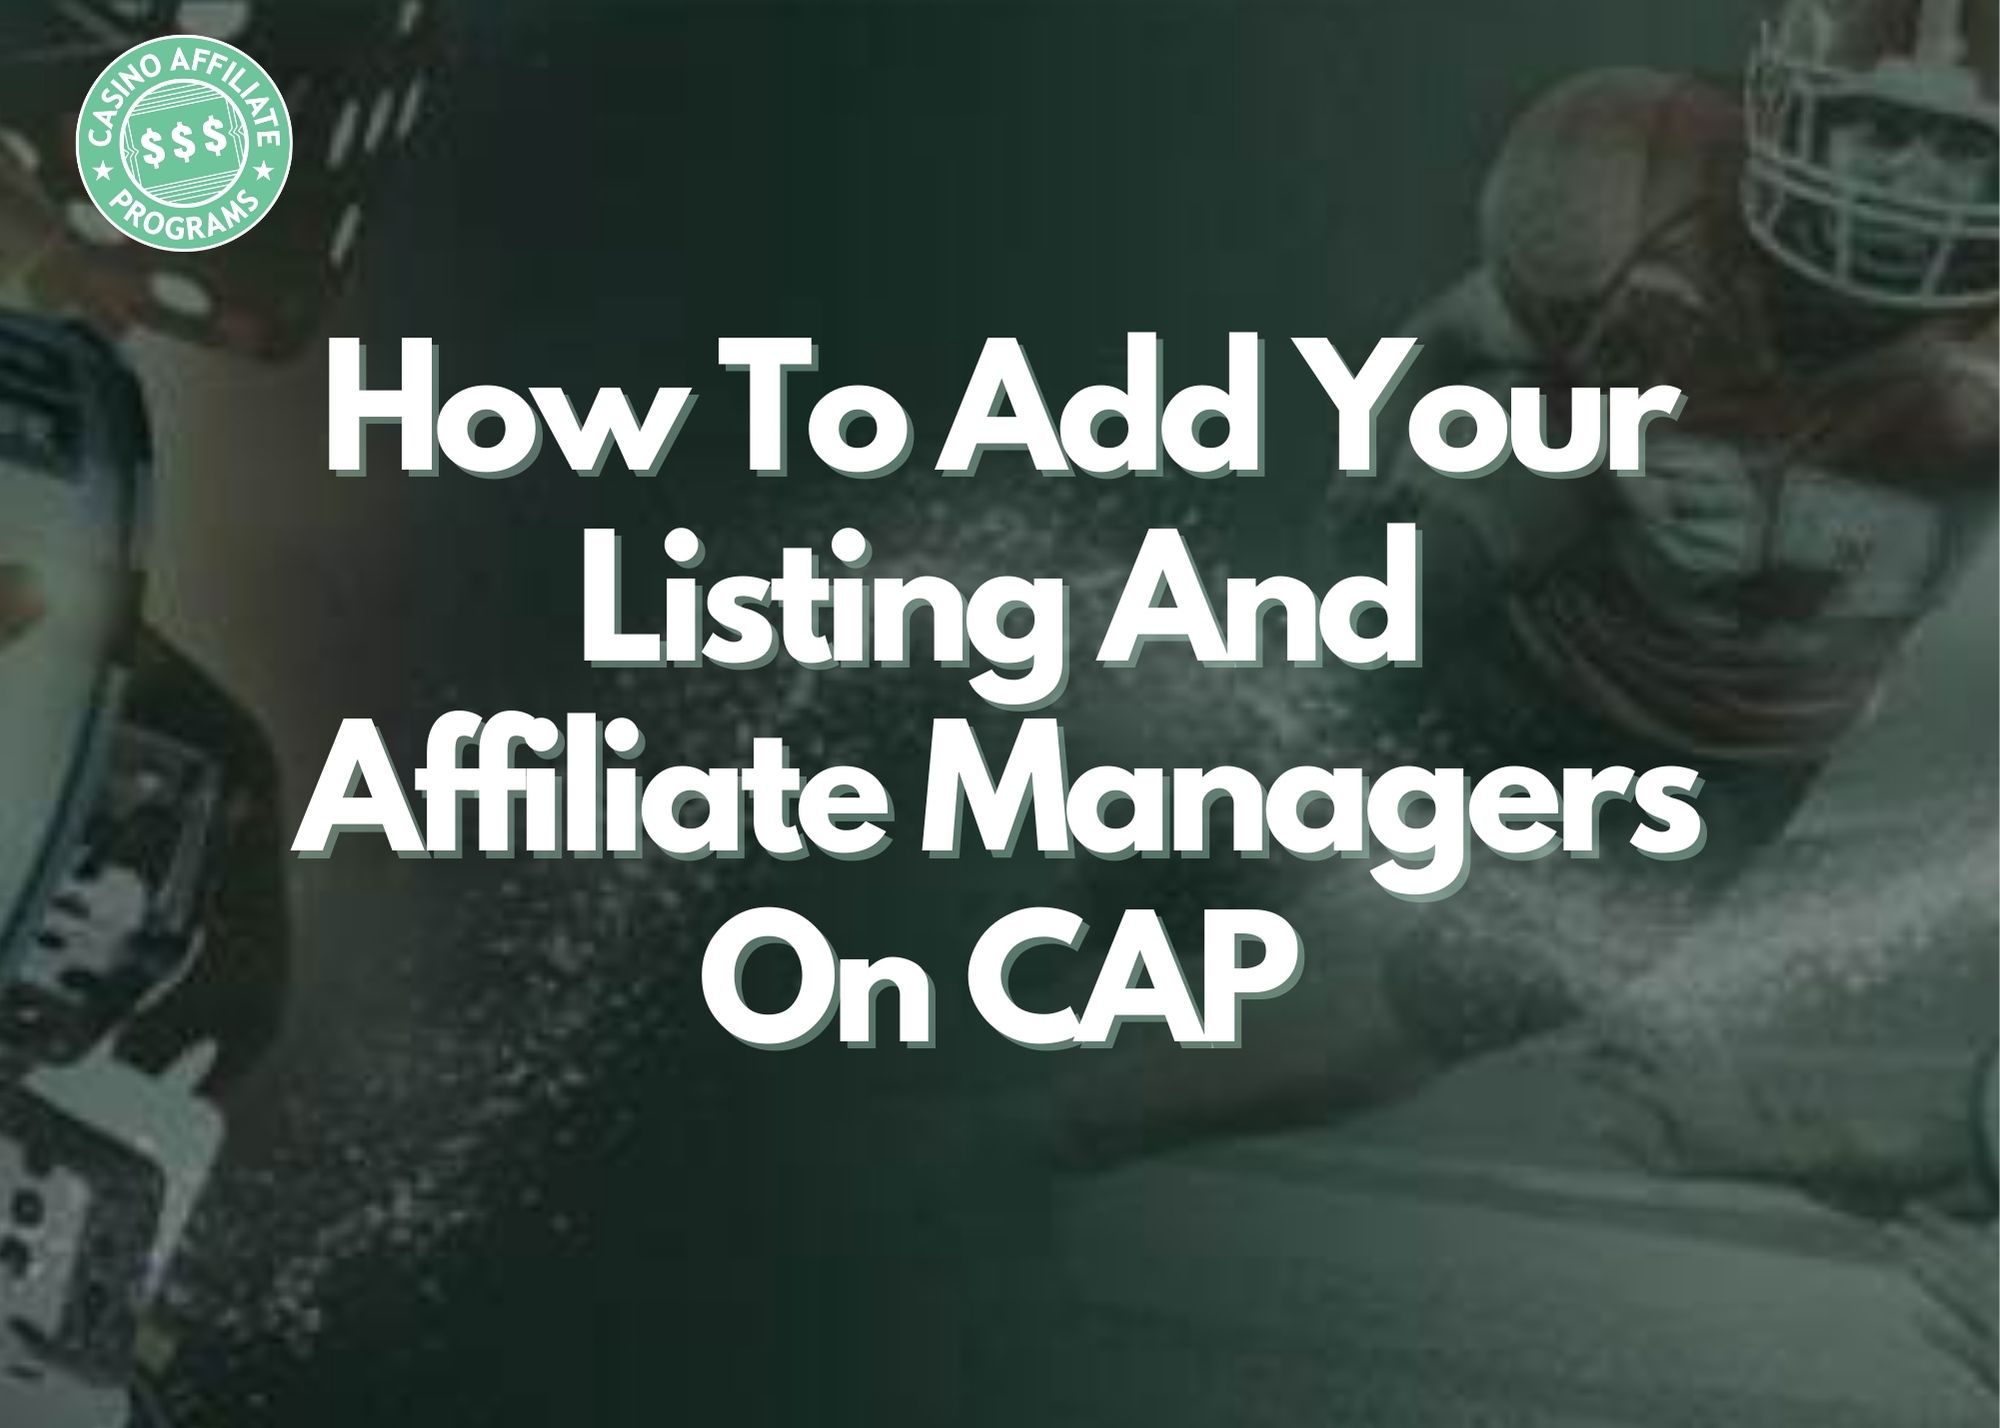 How To Add Your Affiliate Program and Affiliate Managers on CAP